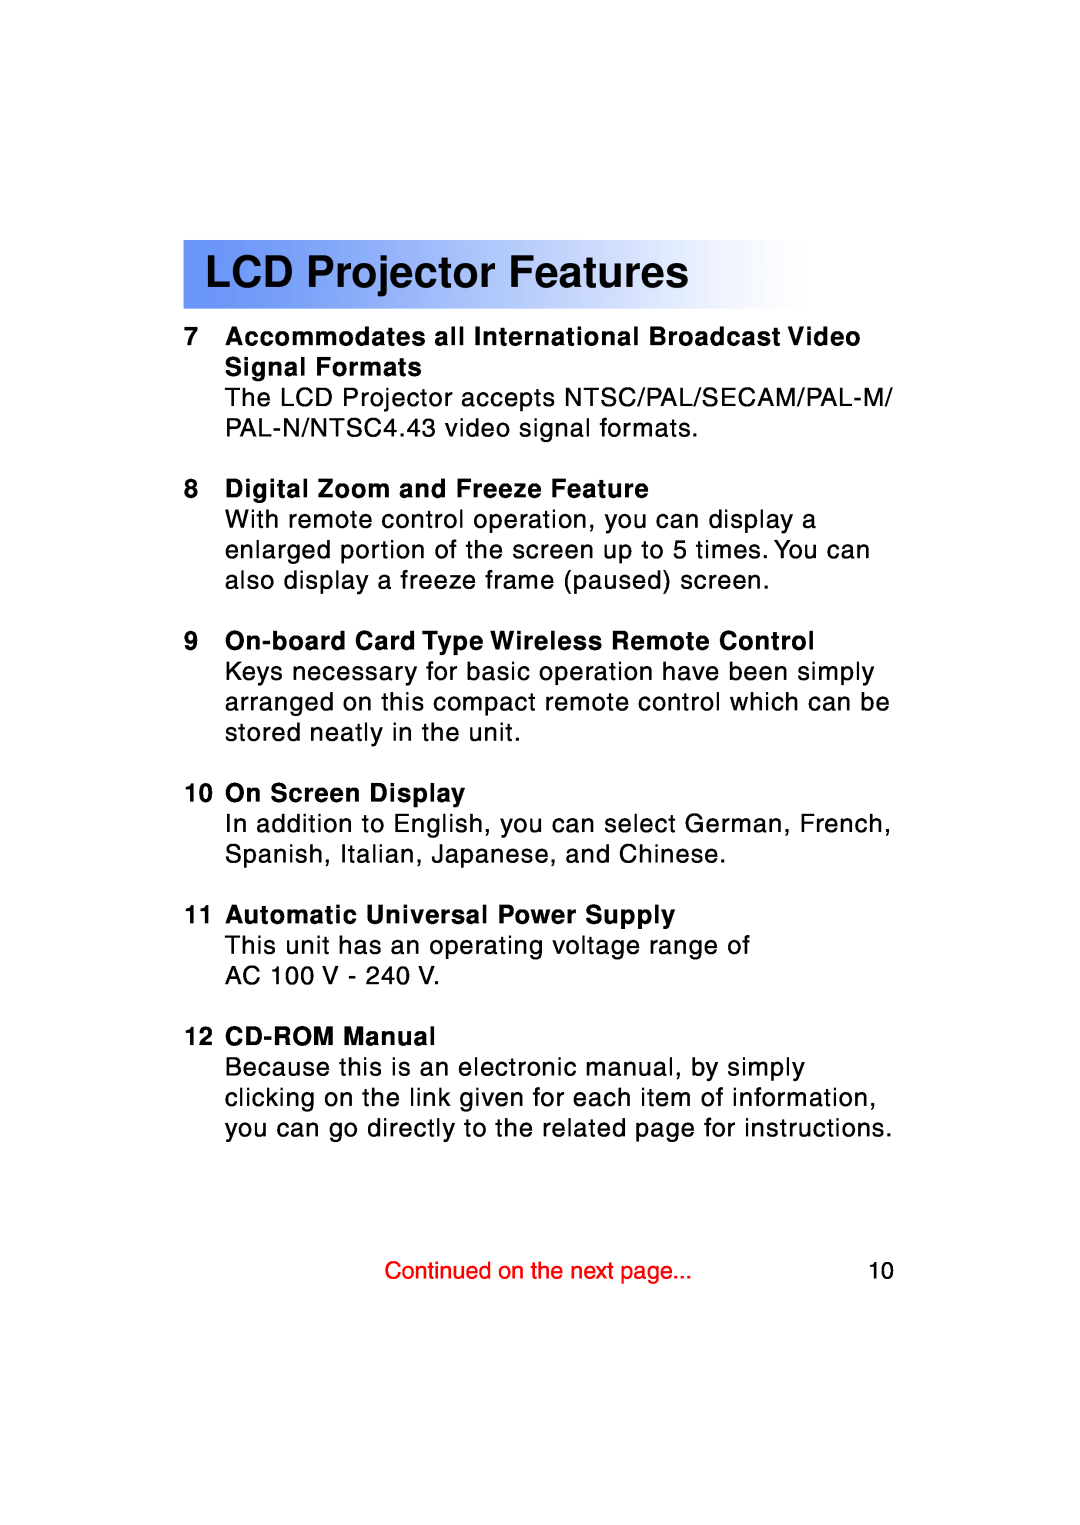 Panasonic PT-LC50U manual LCD Projector Features, Accommodates all International Broadcast Video Signal Formats 